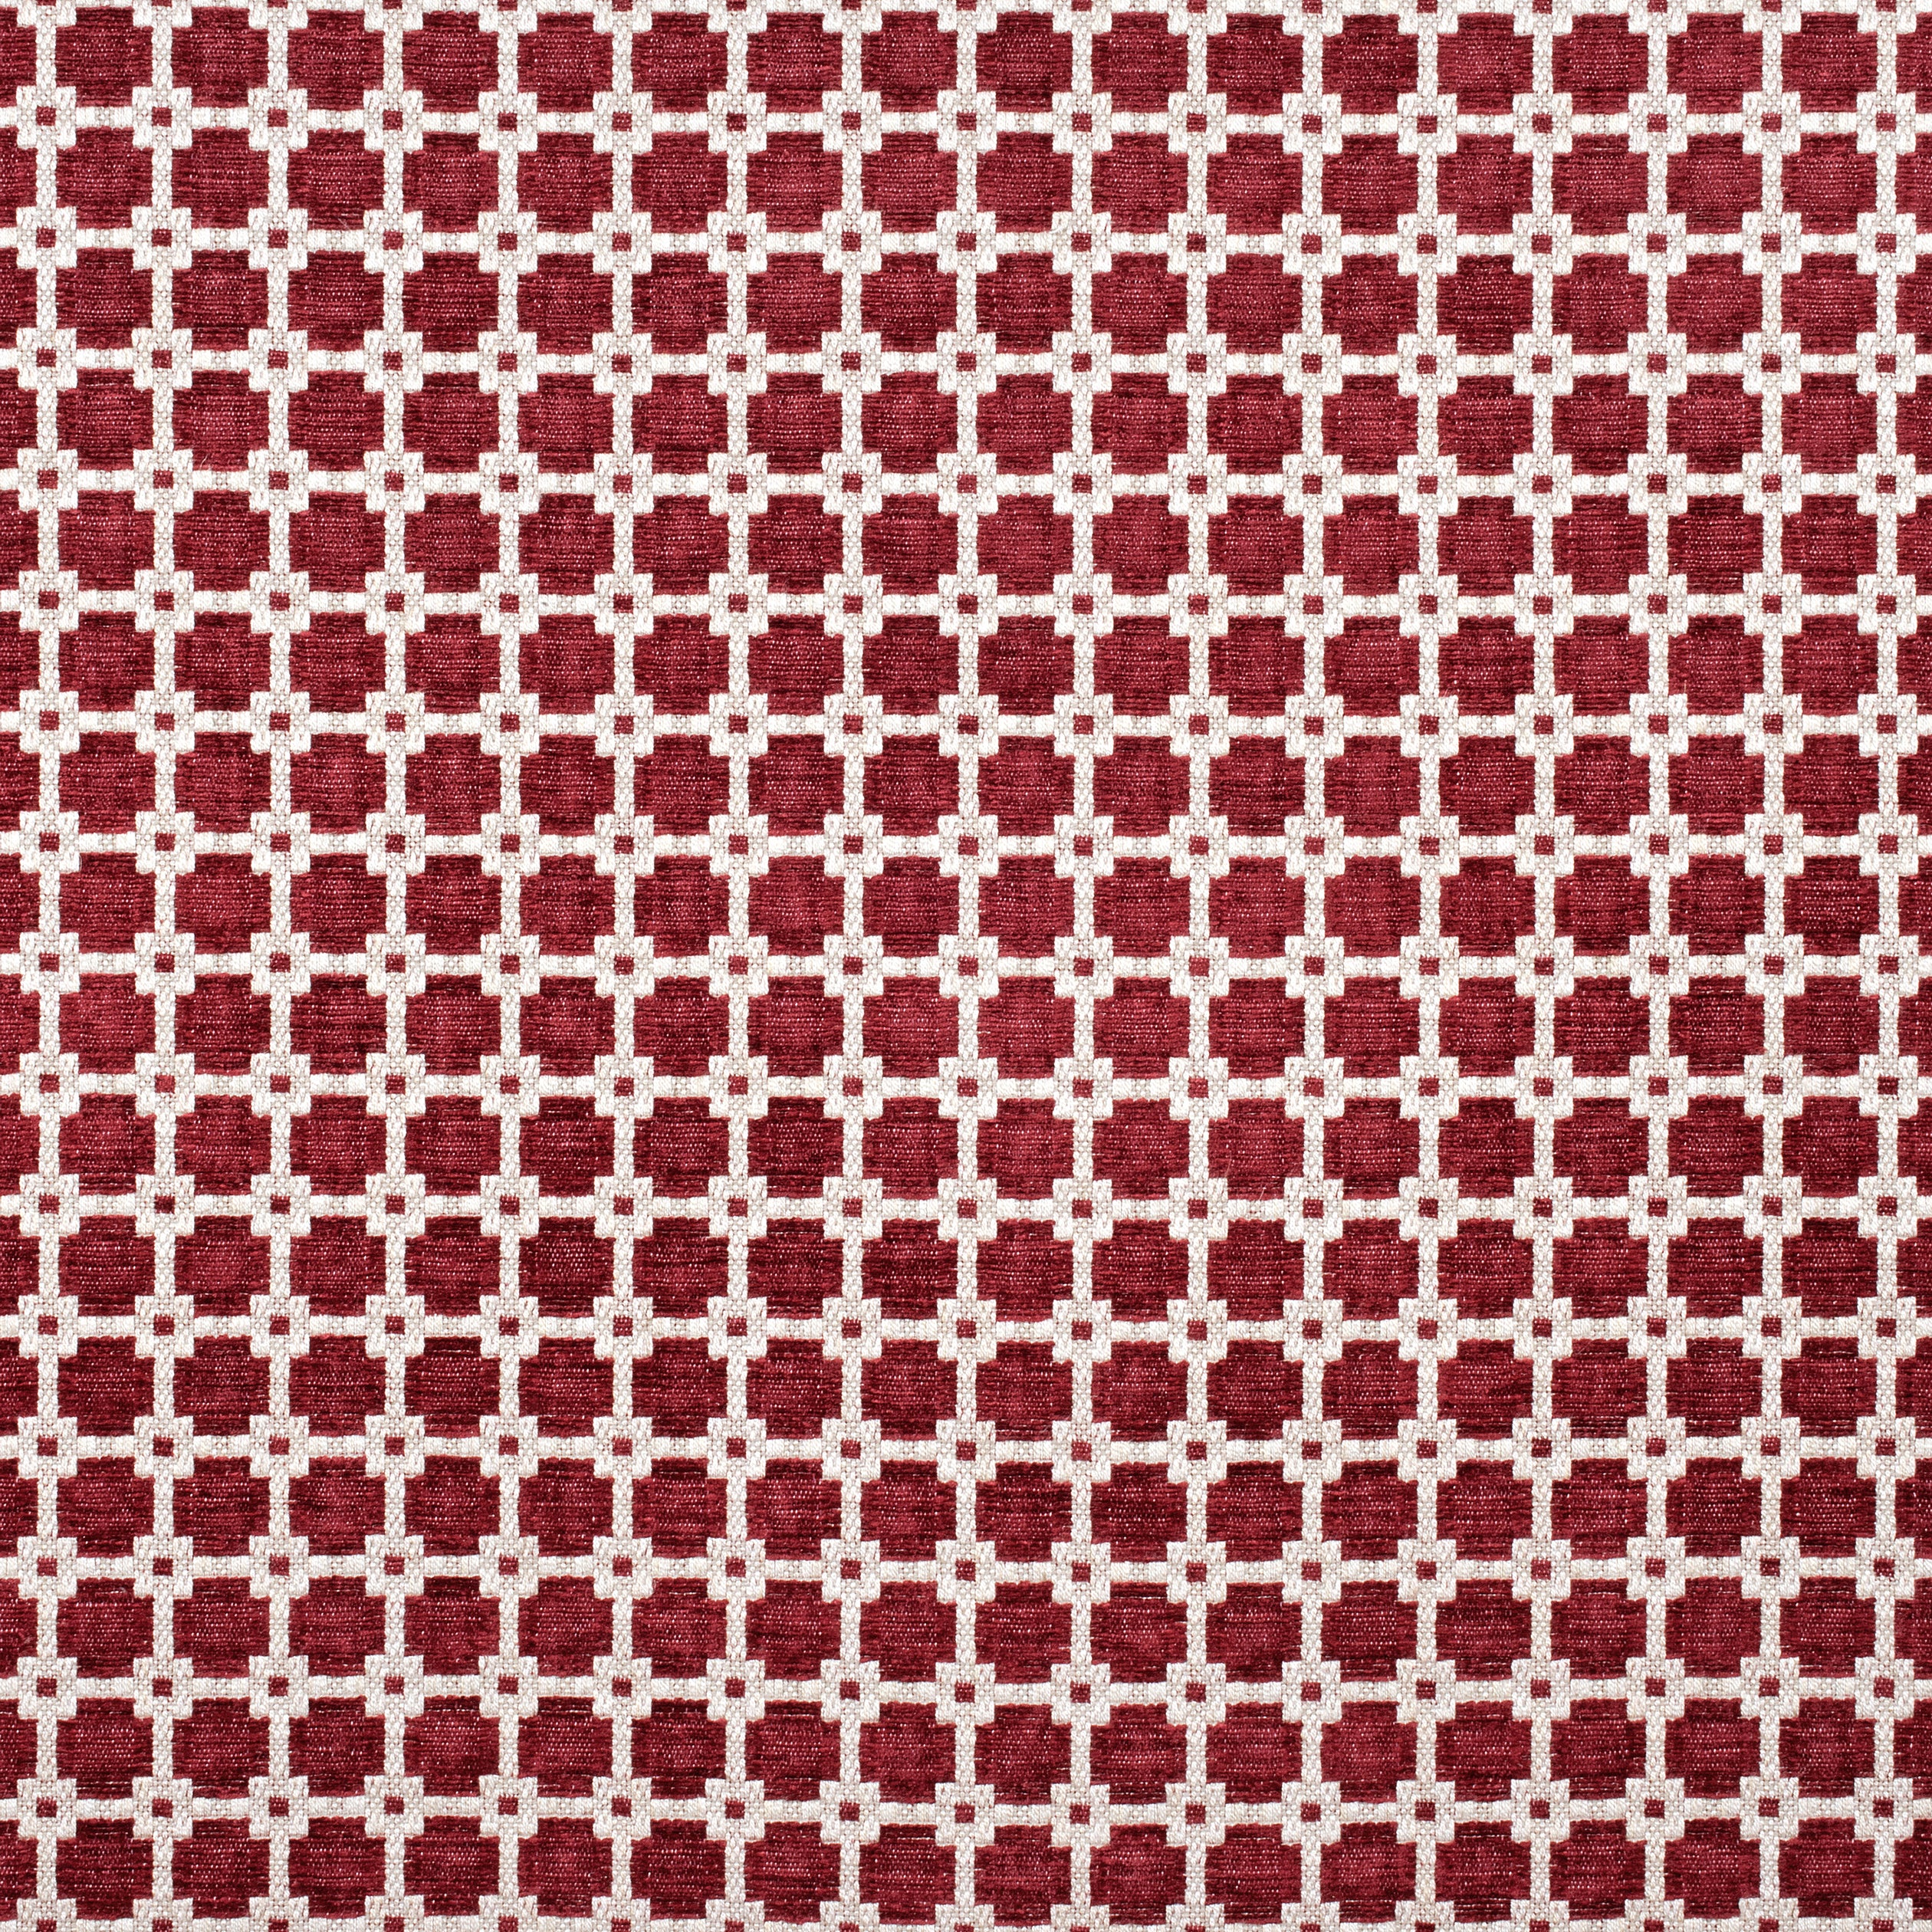 Apollo fabric in cardinal color - pattern number W80717 - by Thibaut in the Woven Resource 11: Rialto collection